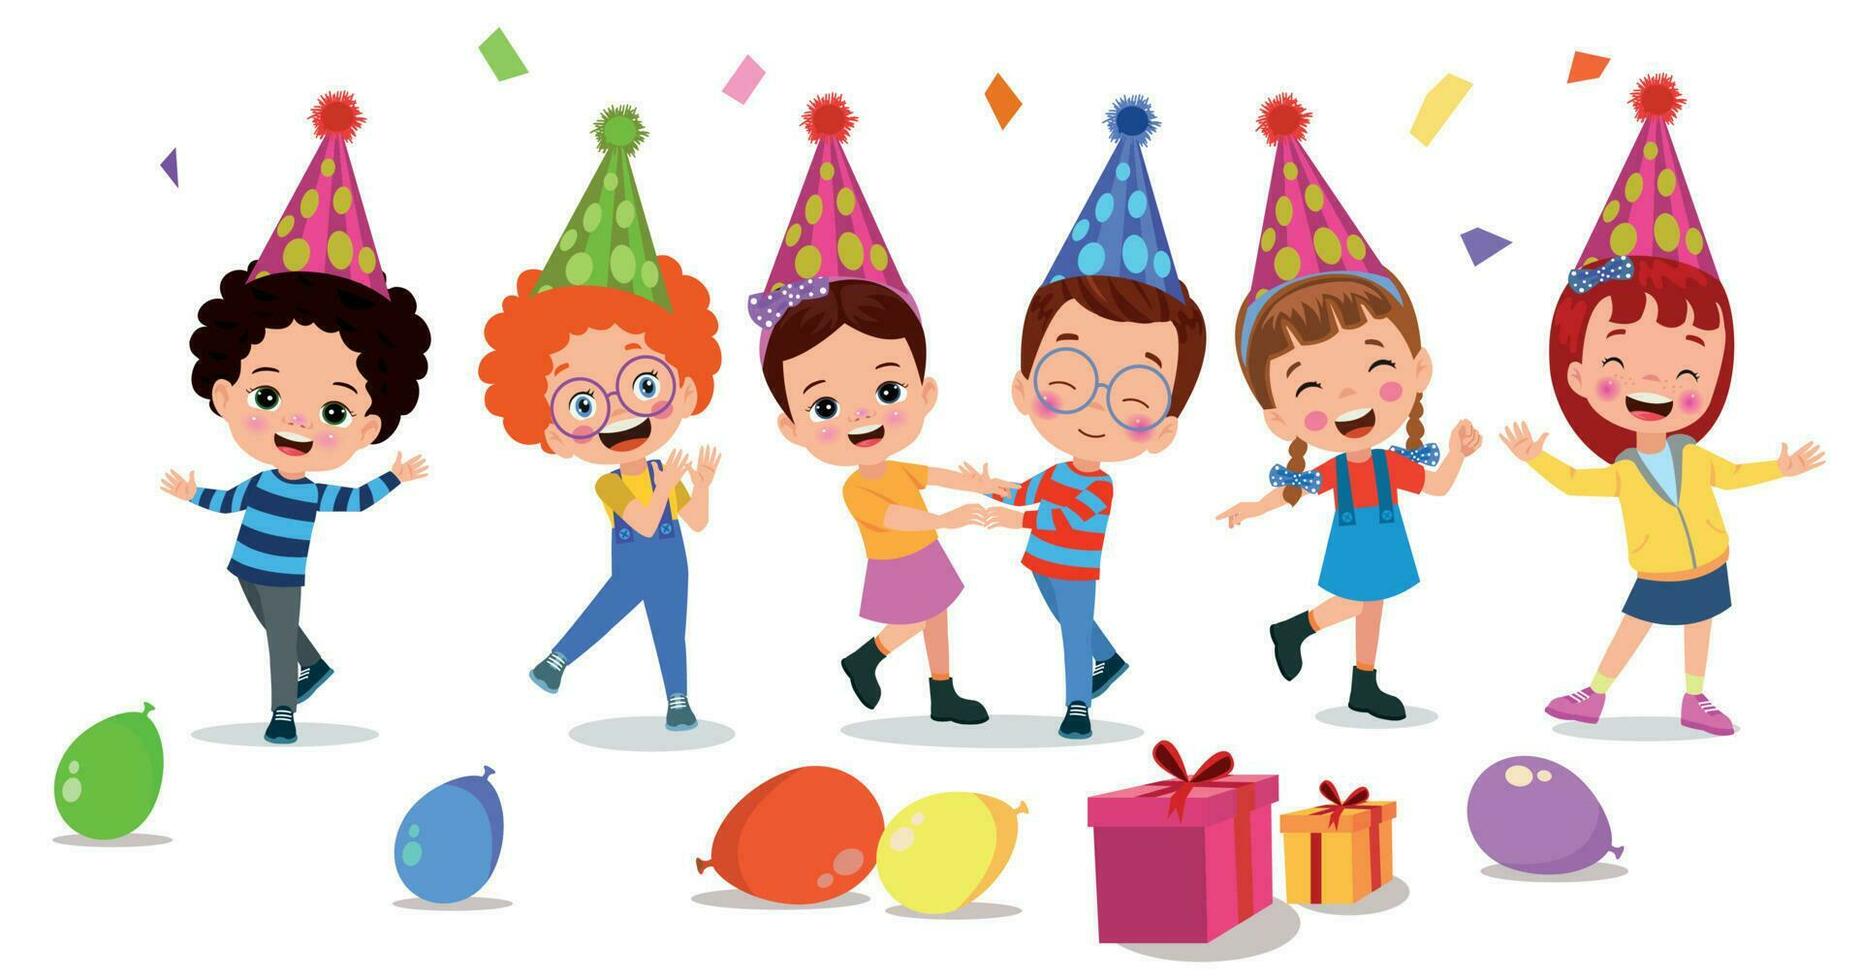 A cartoon of children celebrating a birthday with a birthday hat and a gift. vector